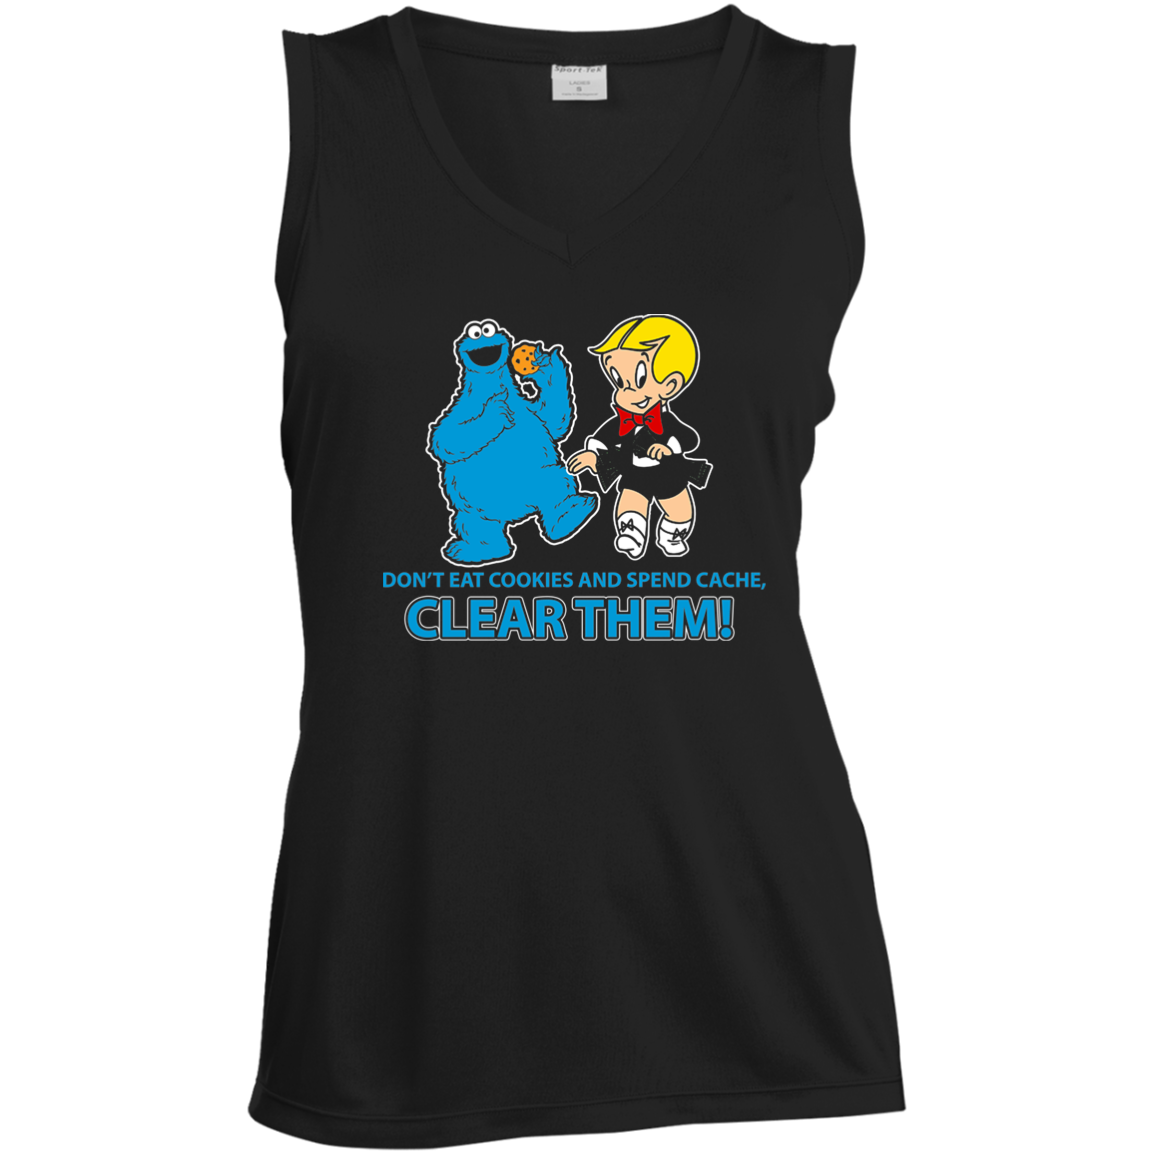 ArtichokeUSA Custom Design. Don't Eat Cookies And Spend Cache! Delete Them! Cookie Monster and Richie Rich Fan Art/Parody. Ladies' Sleeveless V-Neck